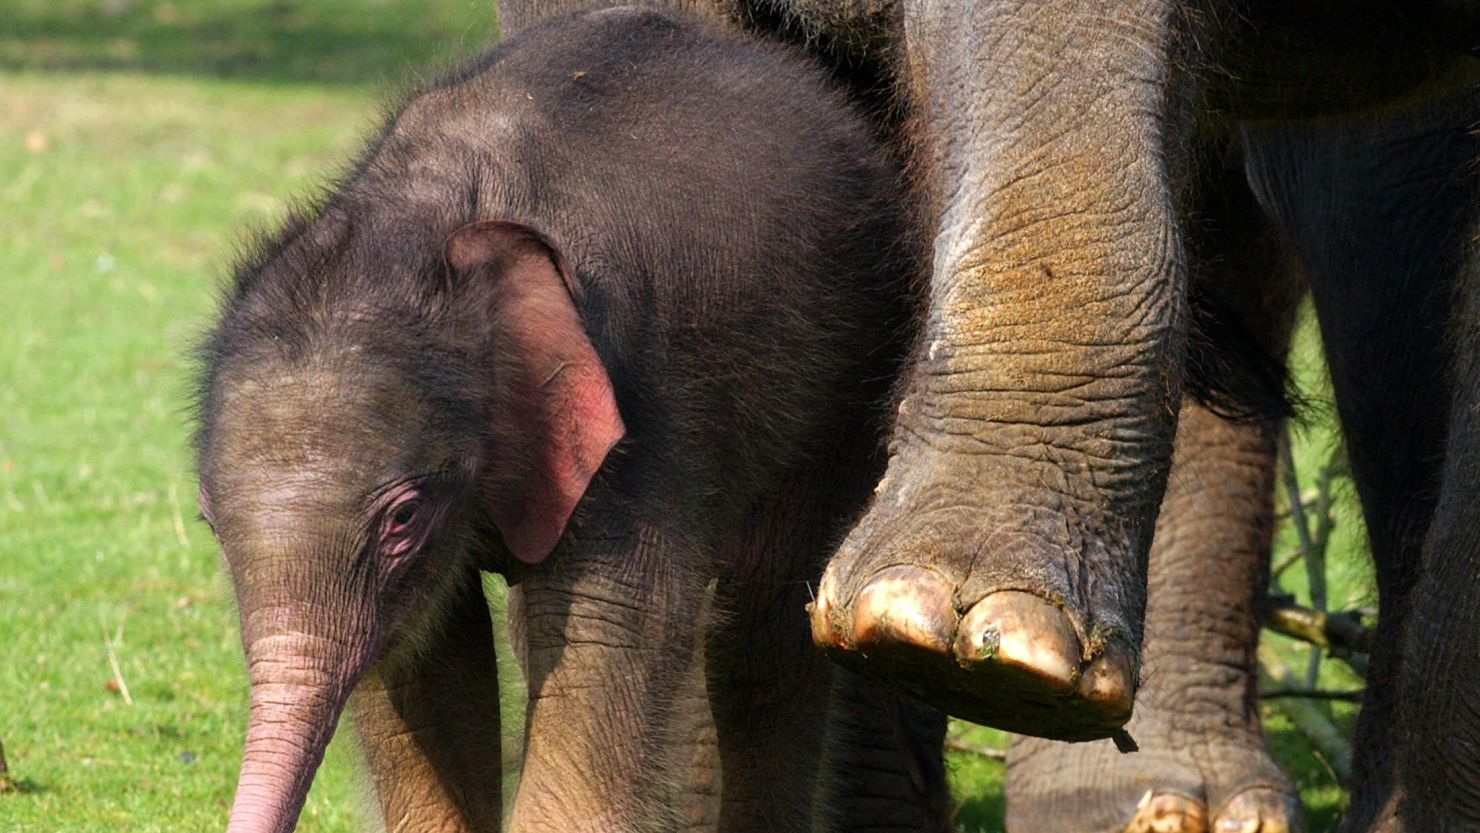 A two week old Asian elephant makes her first public appearance at Whipsnade Wild Animal Park, England, on March 30, 2004.